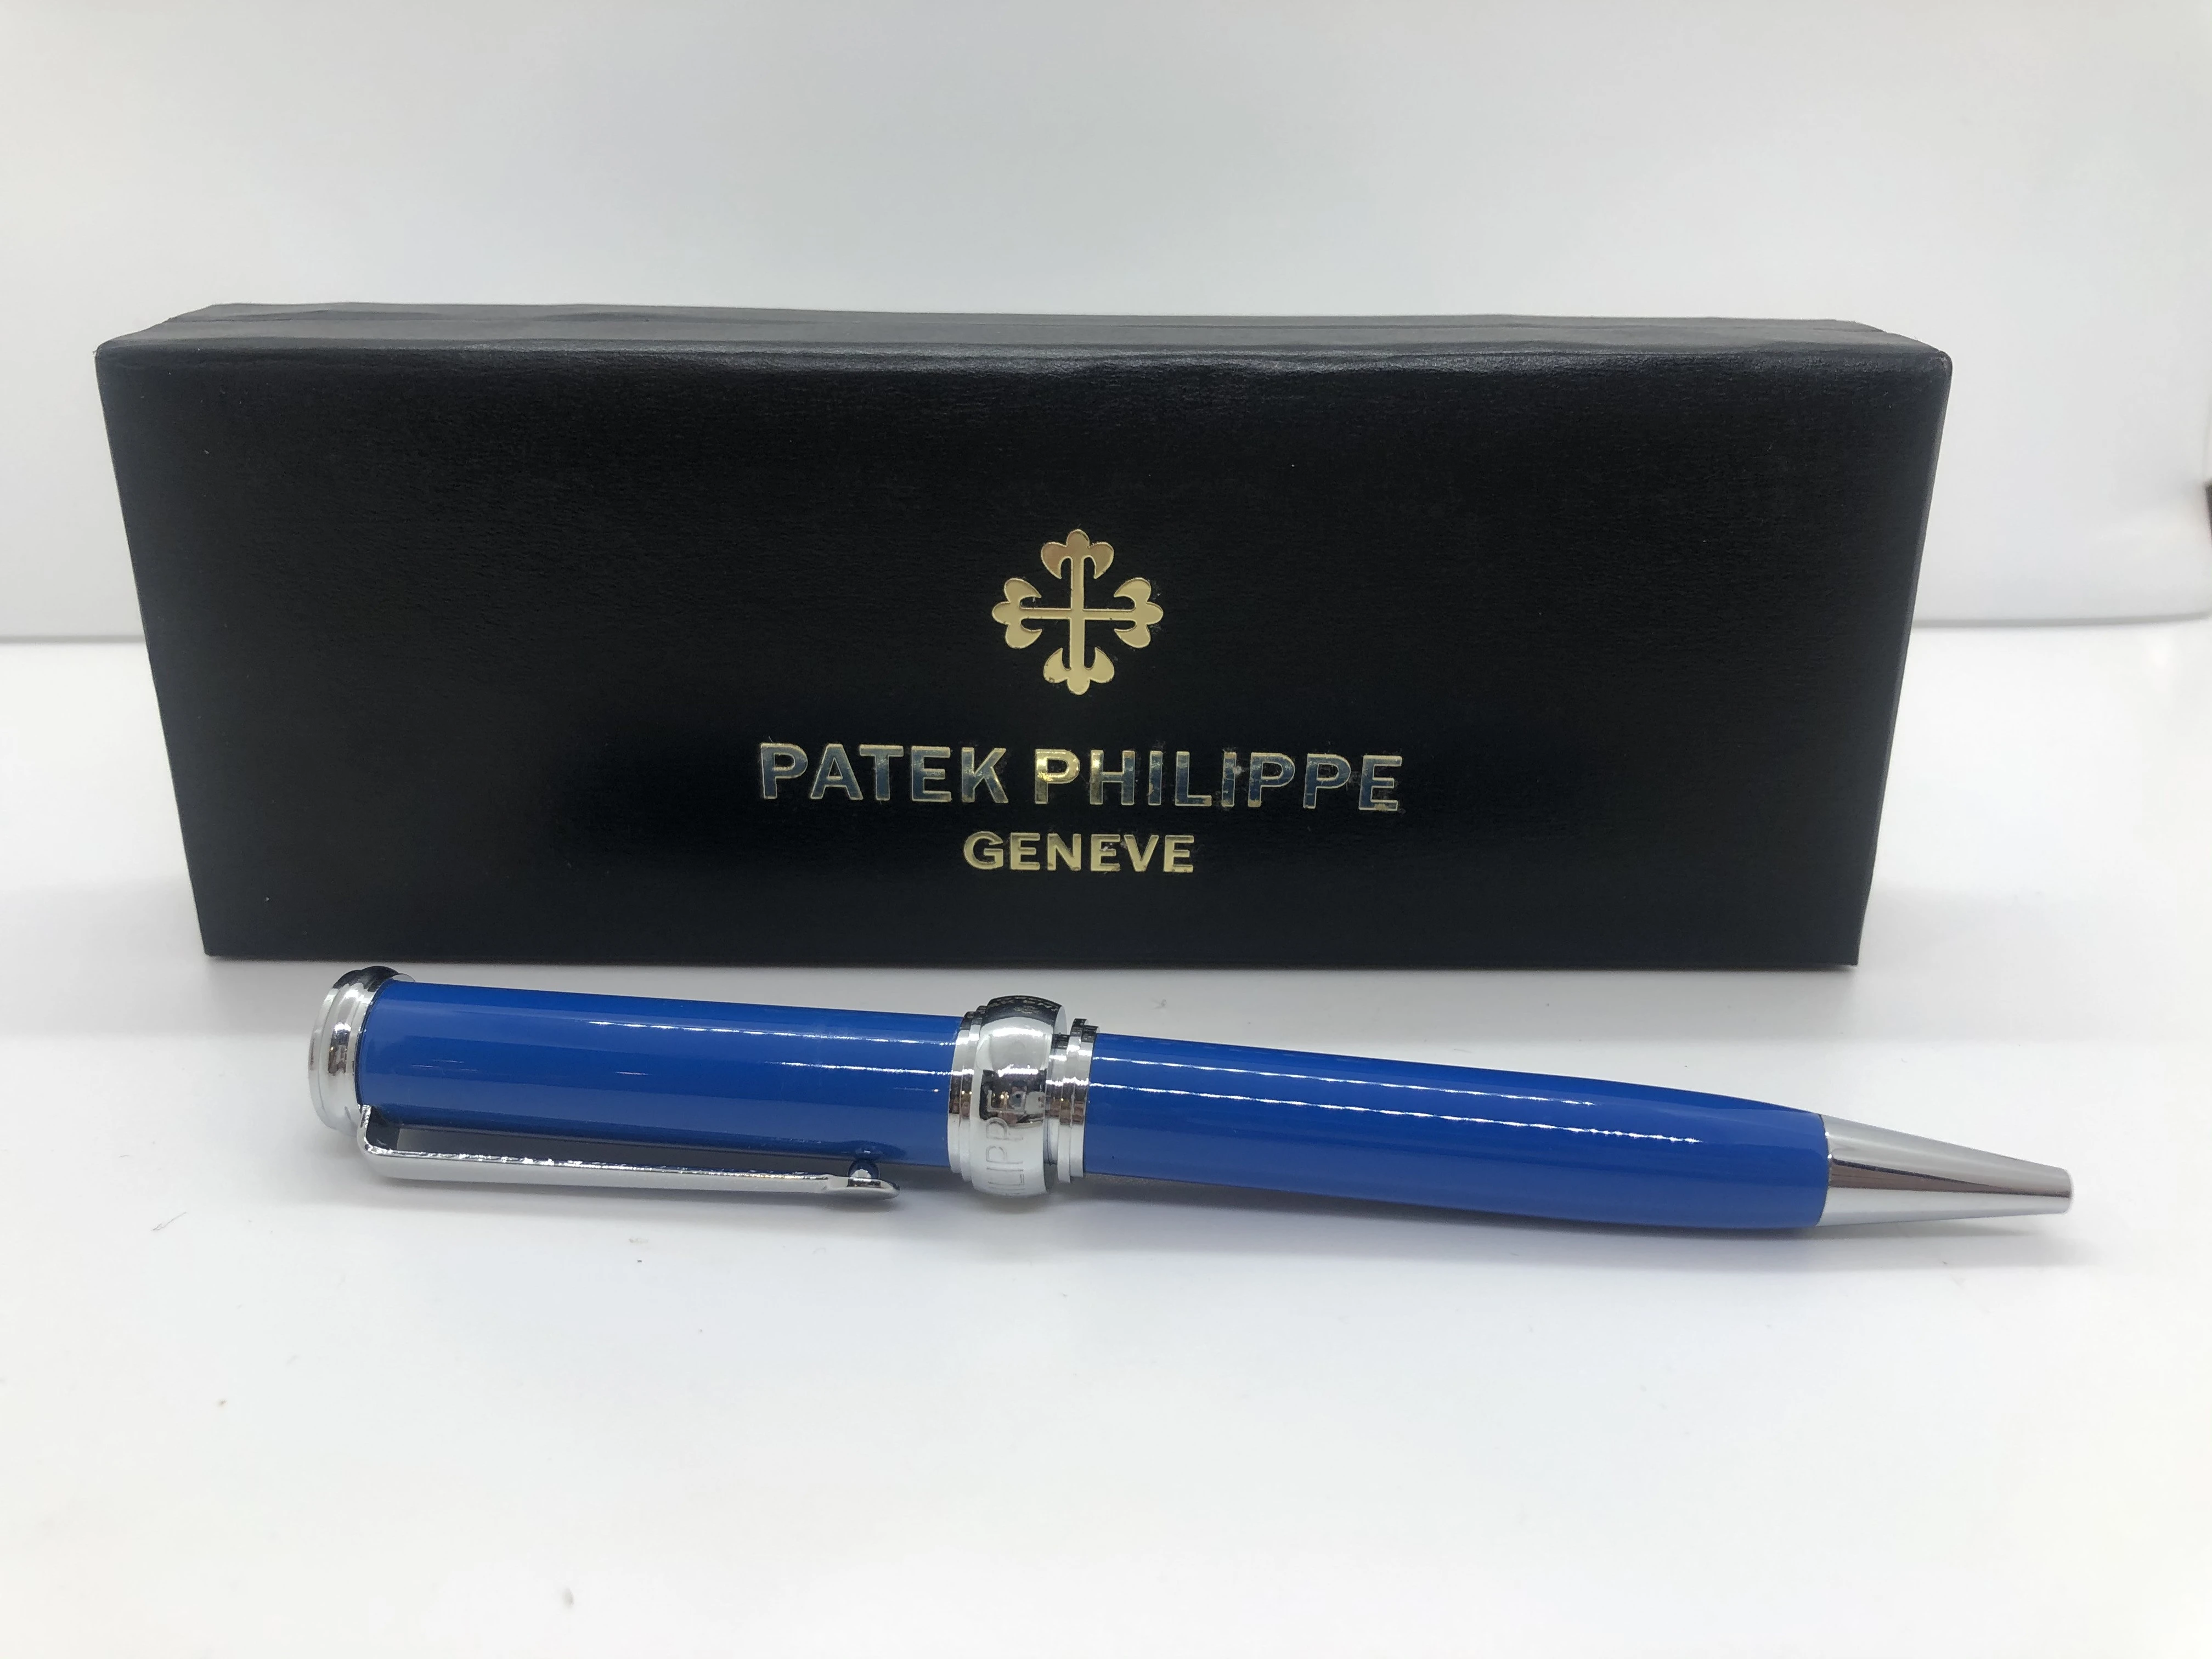 Patek Philippe pen blue * silver - with engraved touches - with the brand's logo on top and engraved in the rotation